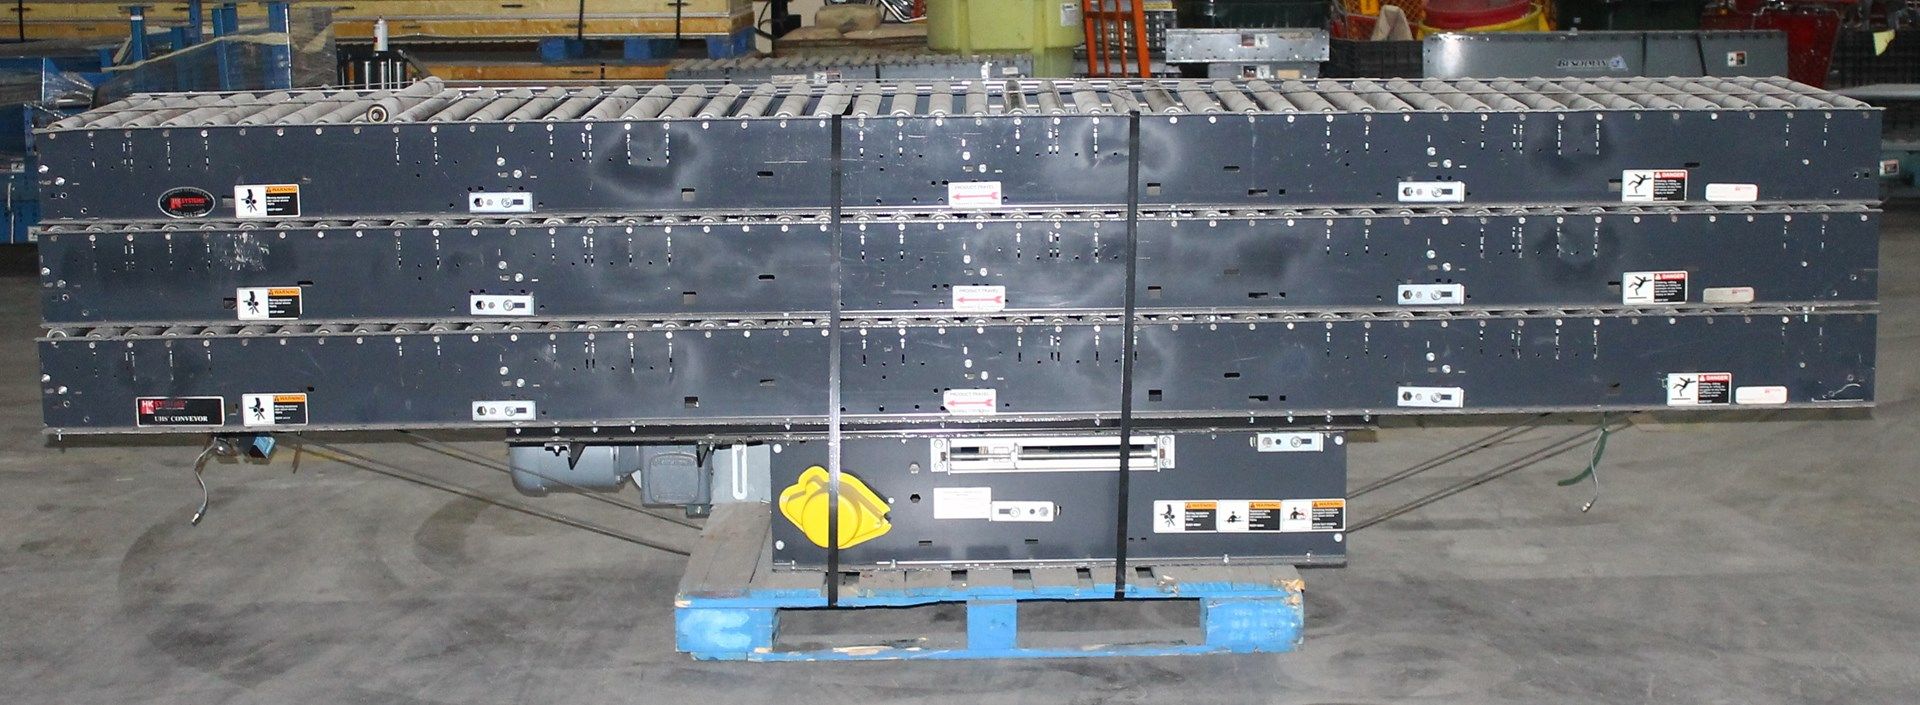 36 FT OF 26"W POWERED CONVEYOR WITH MOTOR